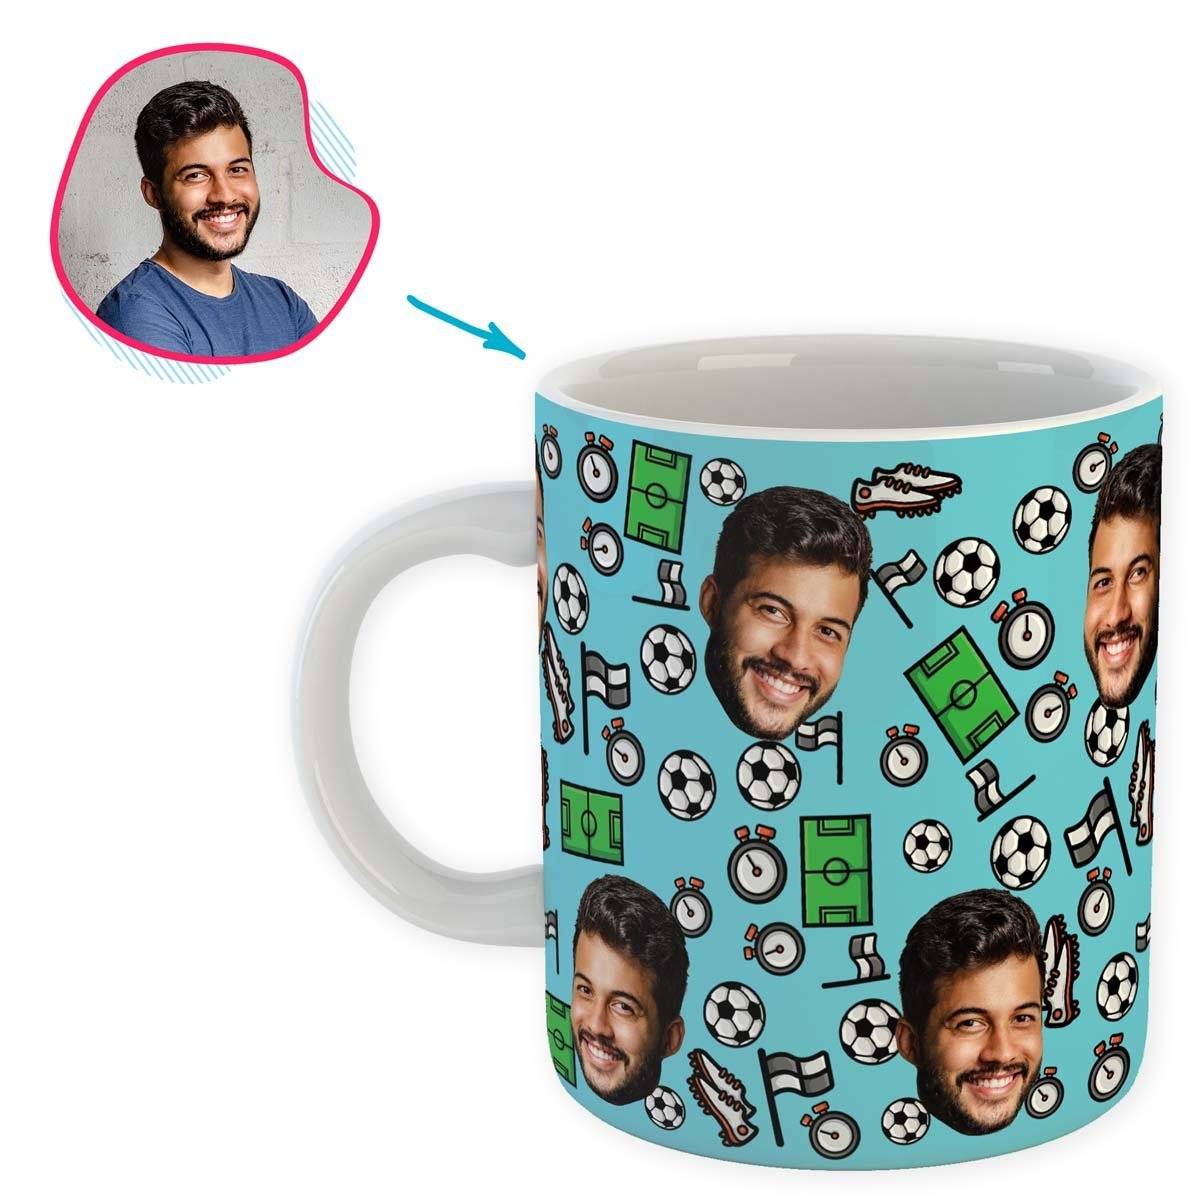 blue Football mug personalized with photo of face printed on it